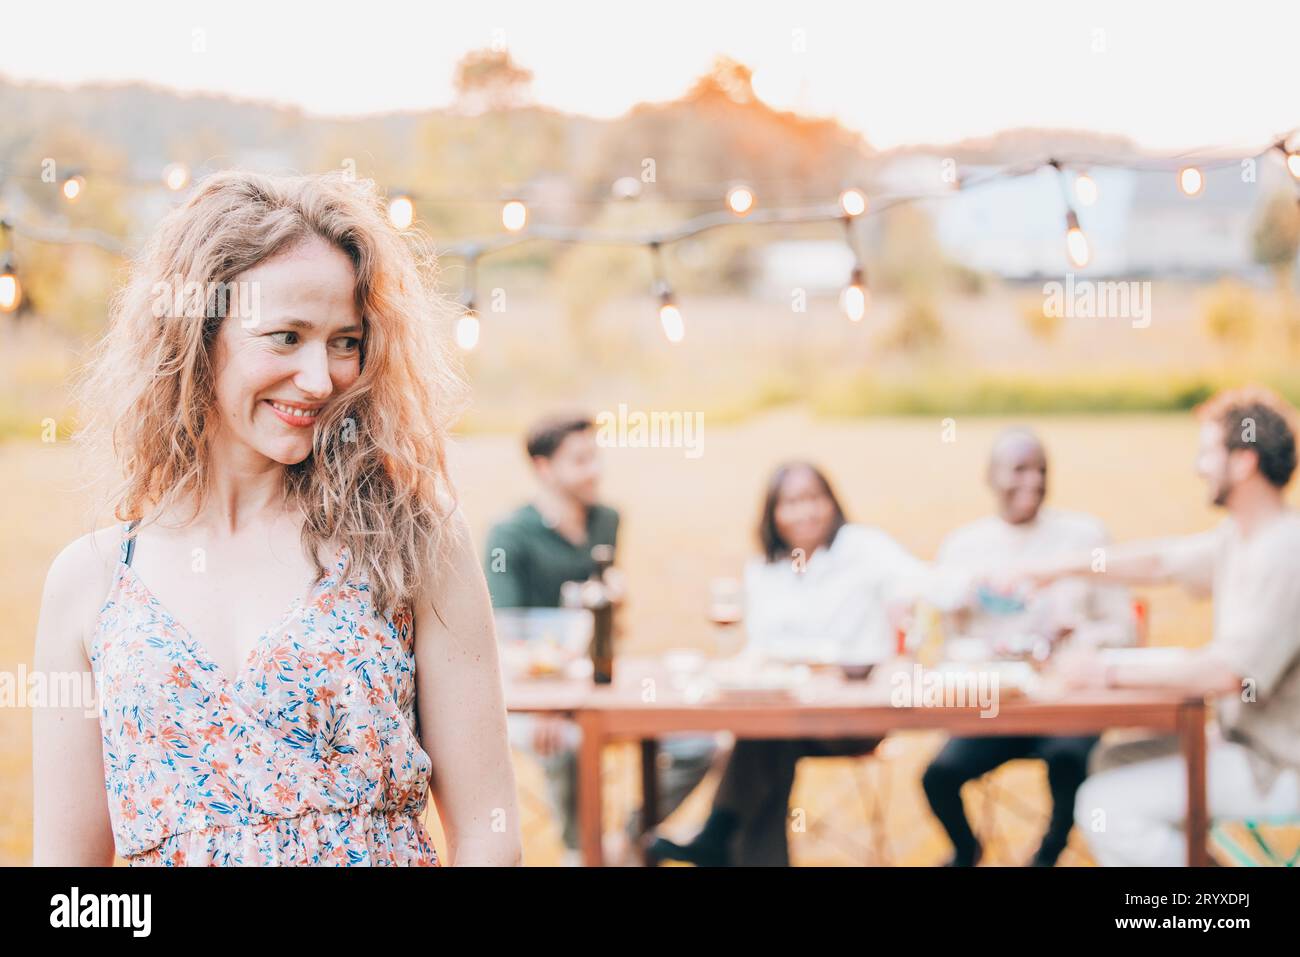 Beautiful young woman with curly blonde hair in a summerdress with a group of friends in the background having an outdoor garden Stock Photo